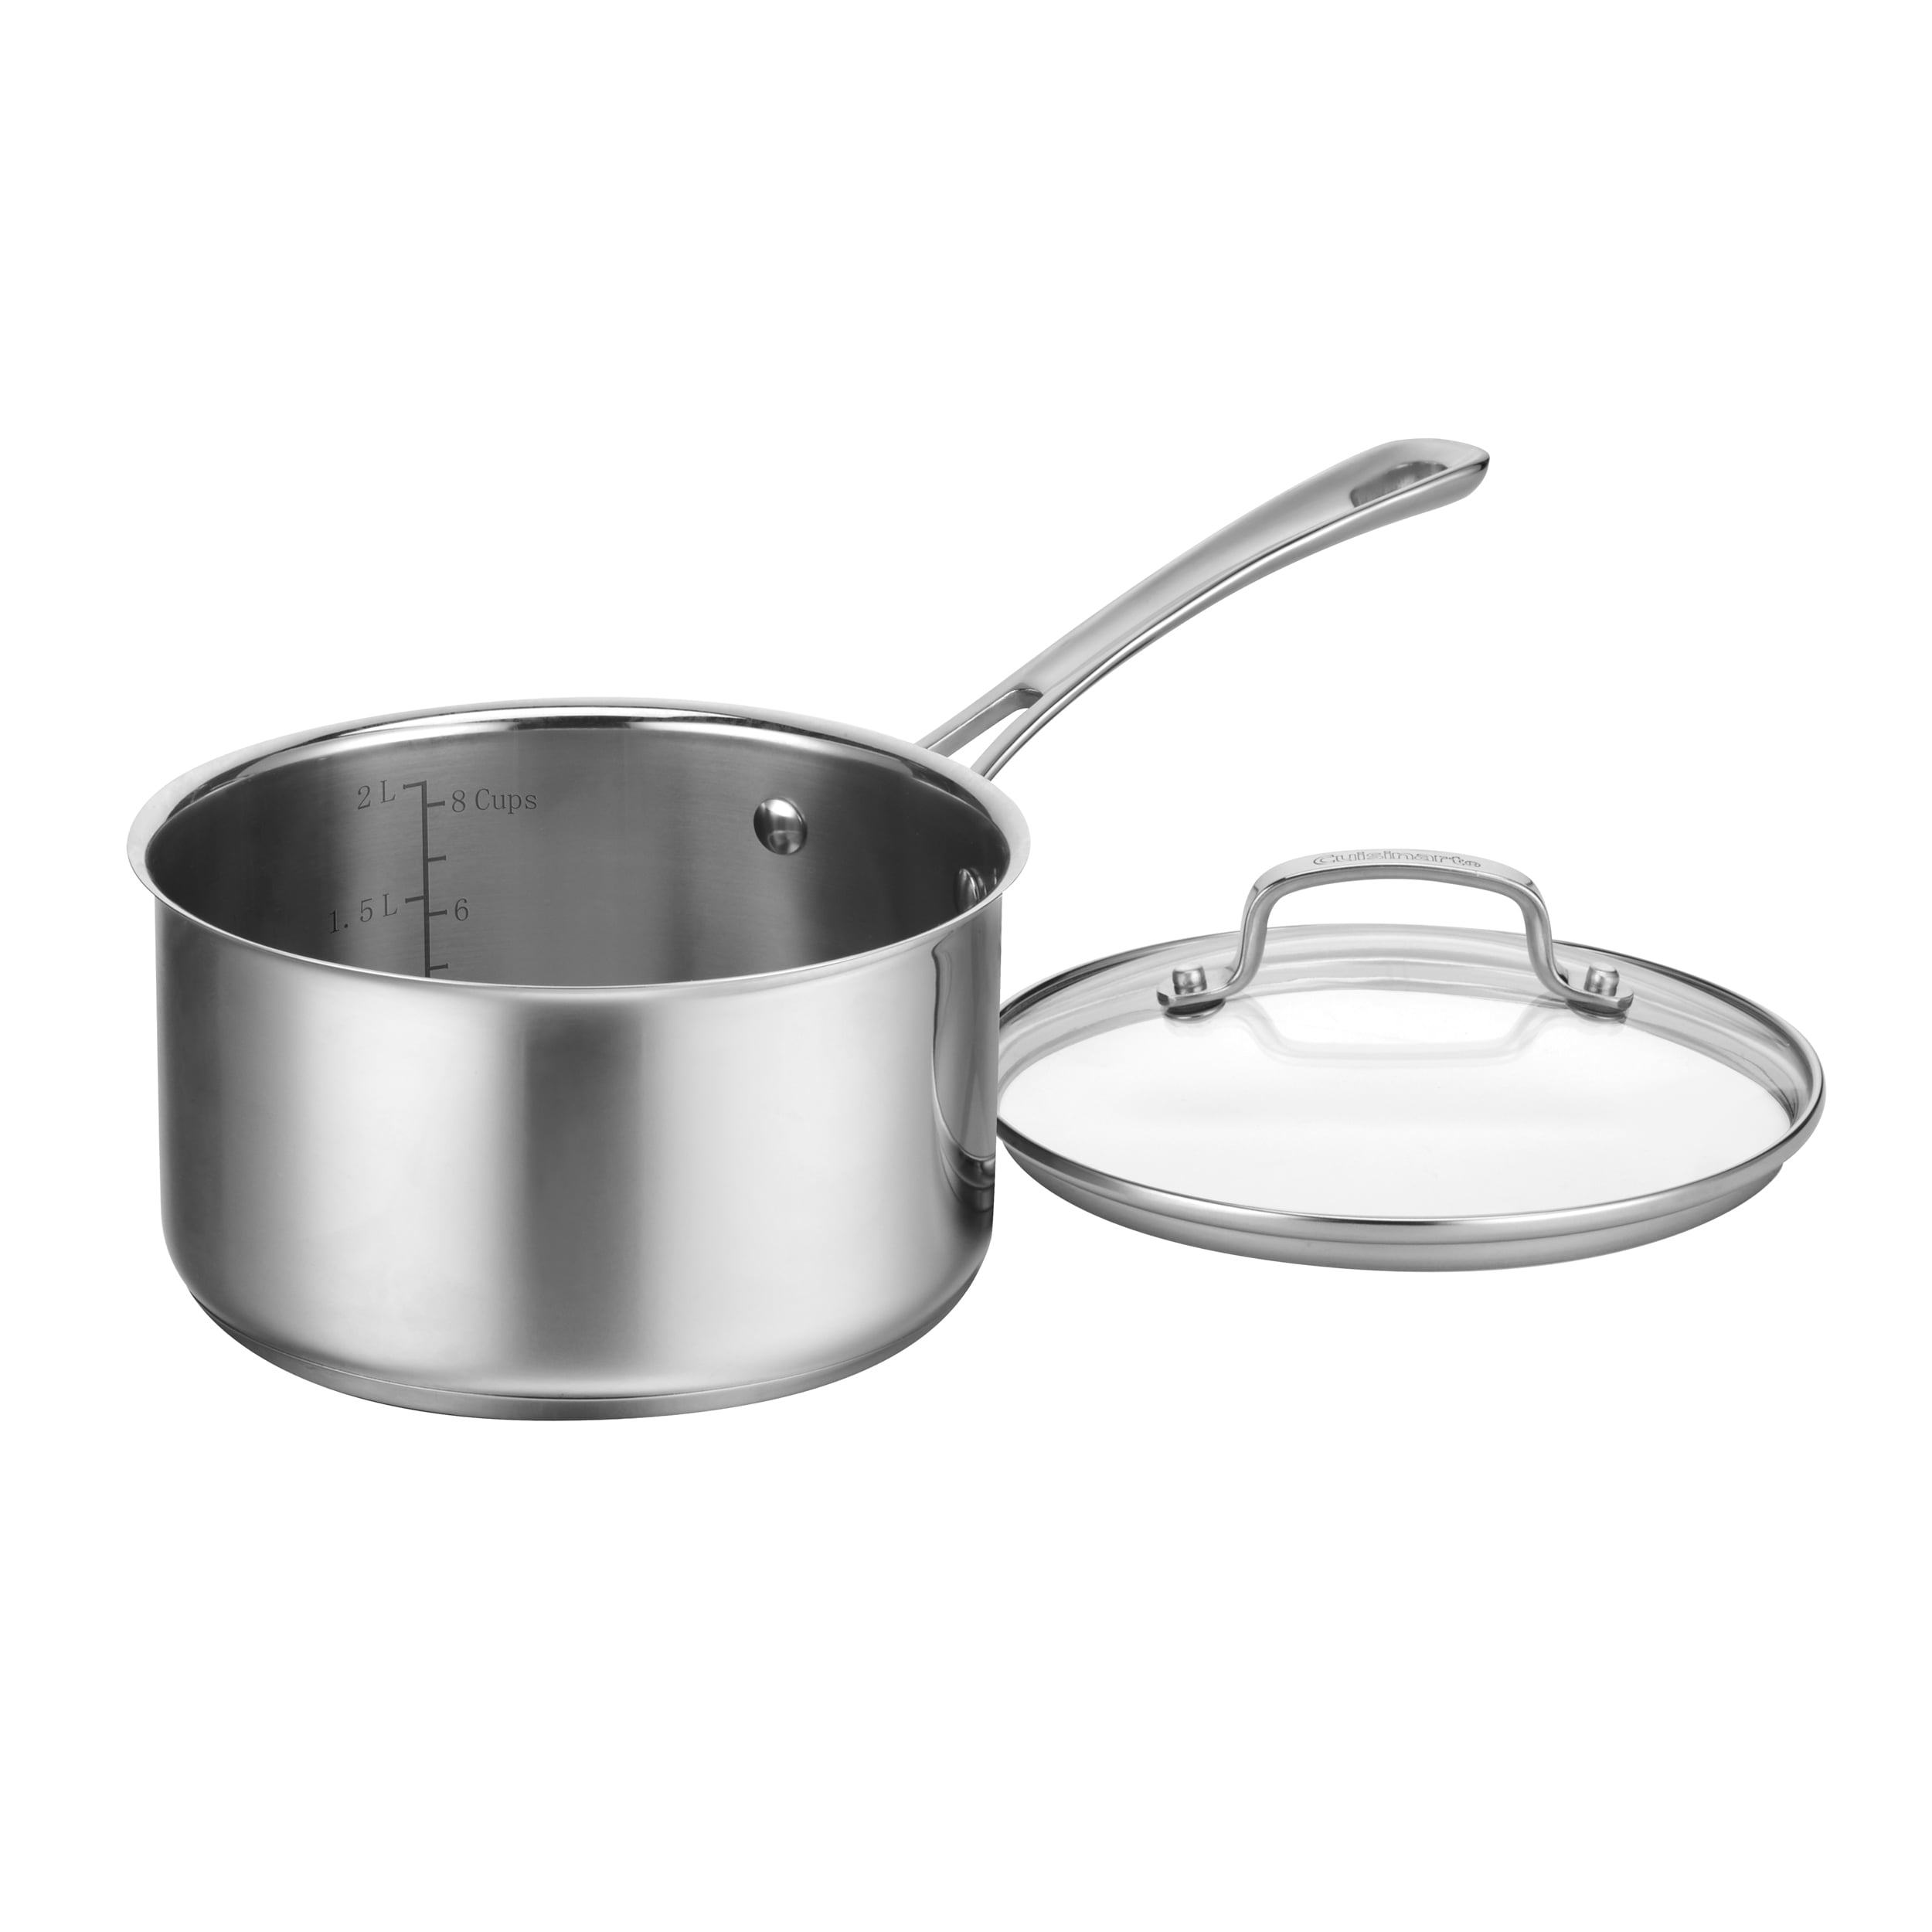 Cuisinart Advantage® Pro Premium Stainless-Steel Cookware 2.5 Qt. Saucepan  with Cover, 92195-18